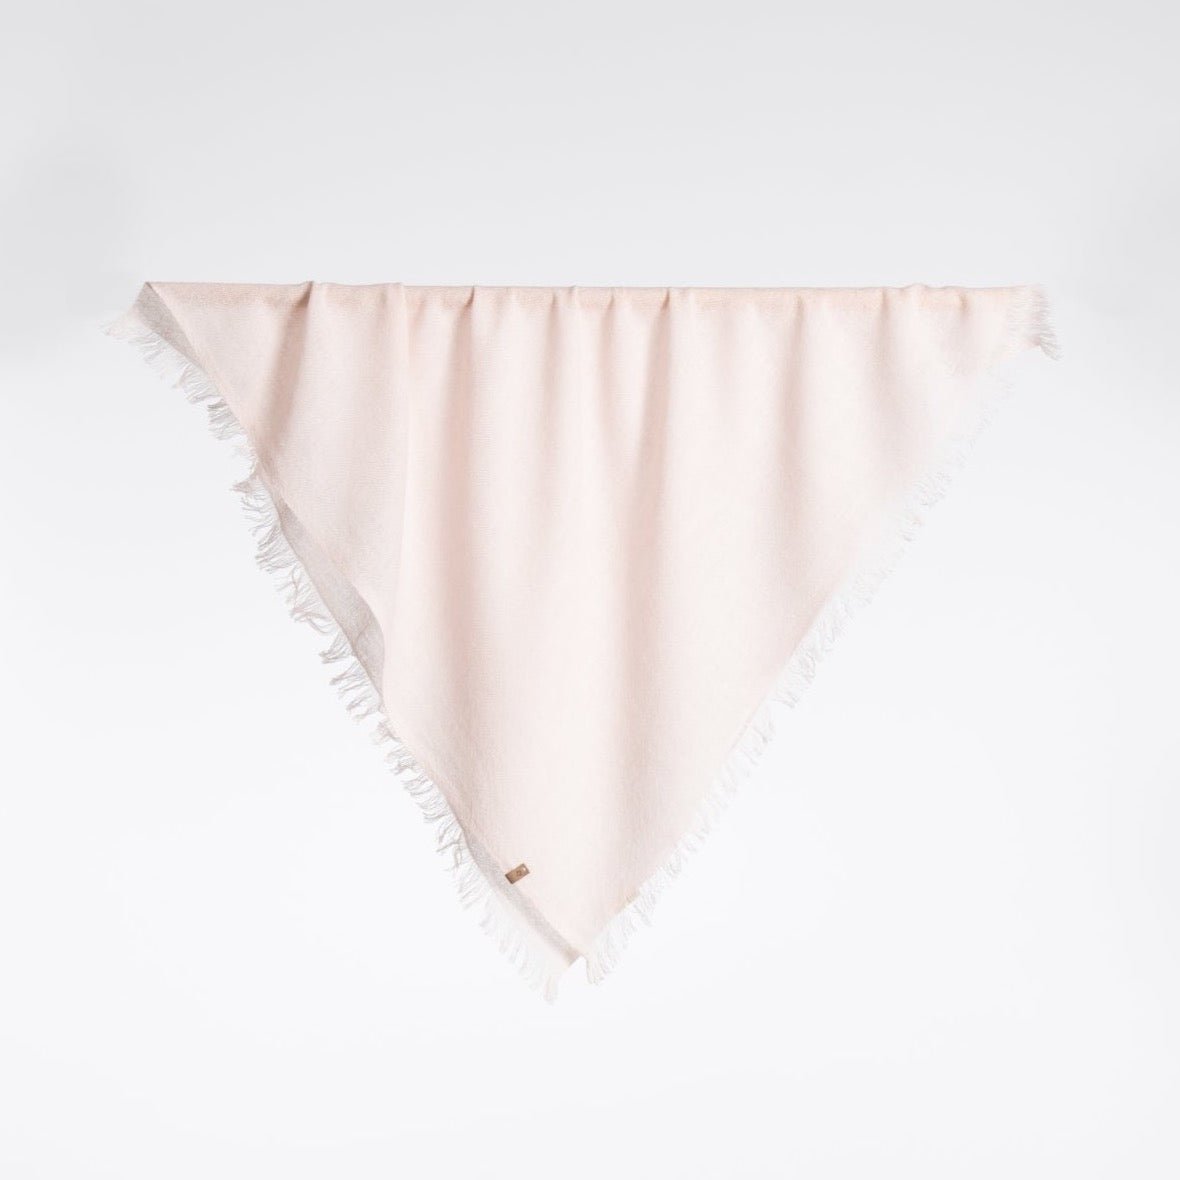 A square scarf made of 100% Merino wool in a light pink color. The Merino Square Woven Scarf in Blush Pink is designed by Dinadi and handcrafted in Nepal.